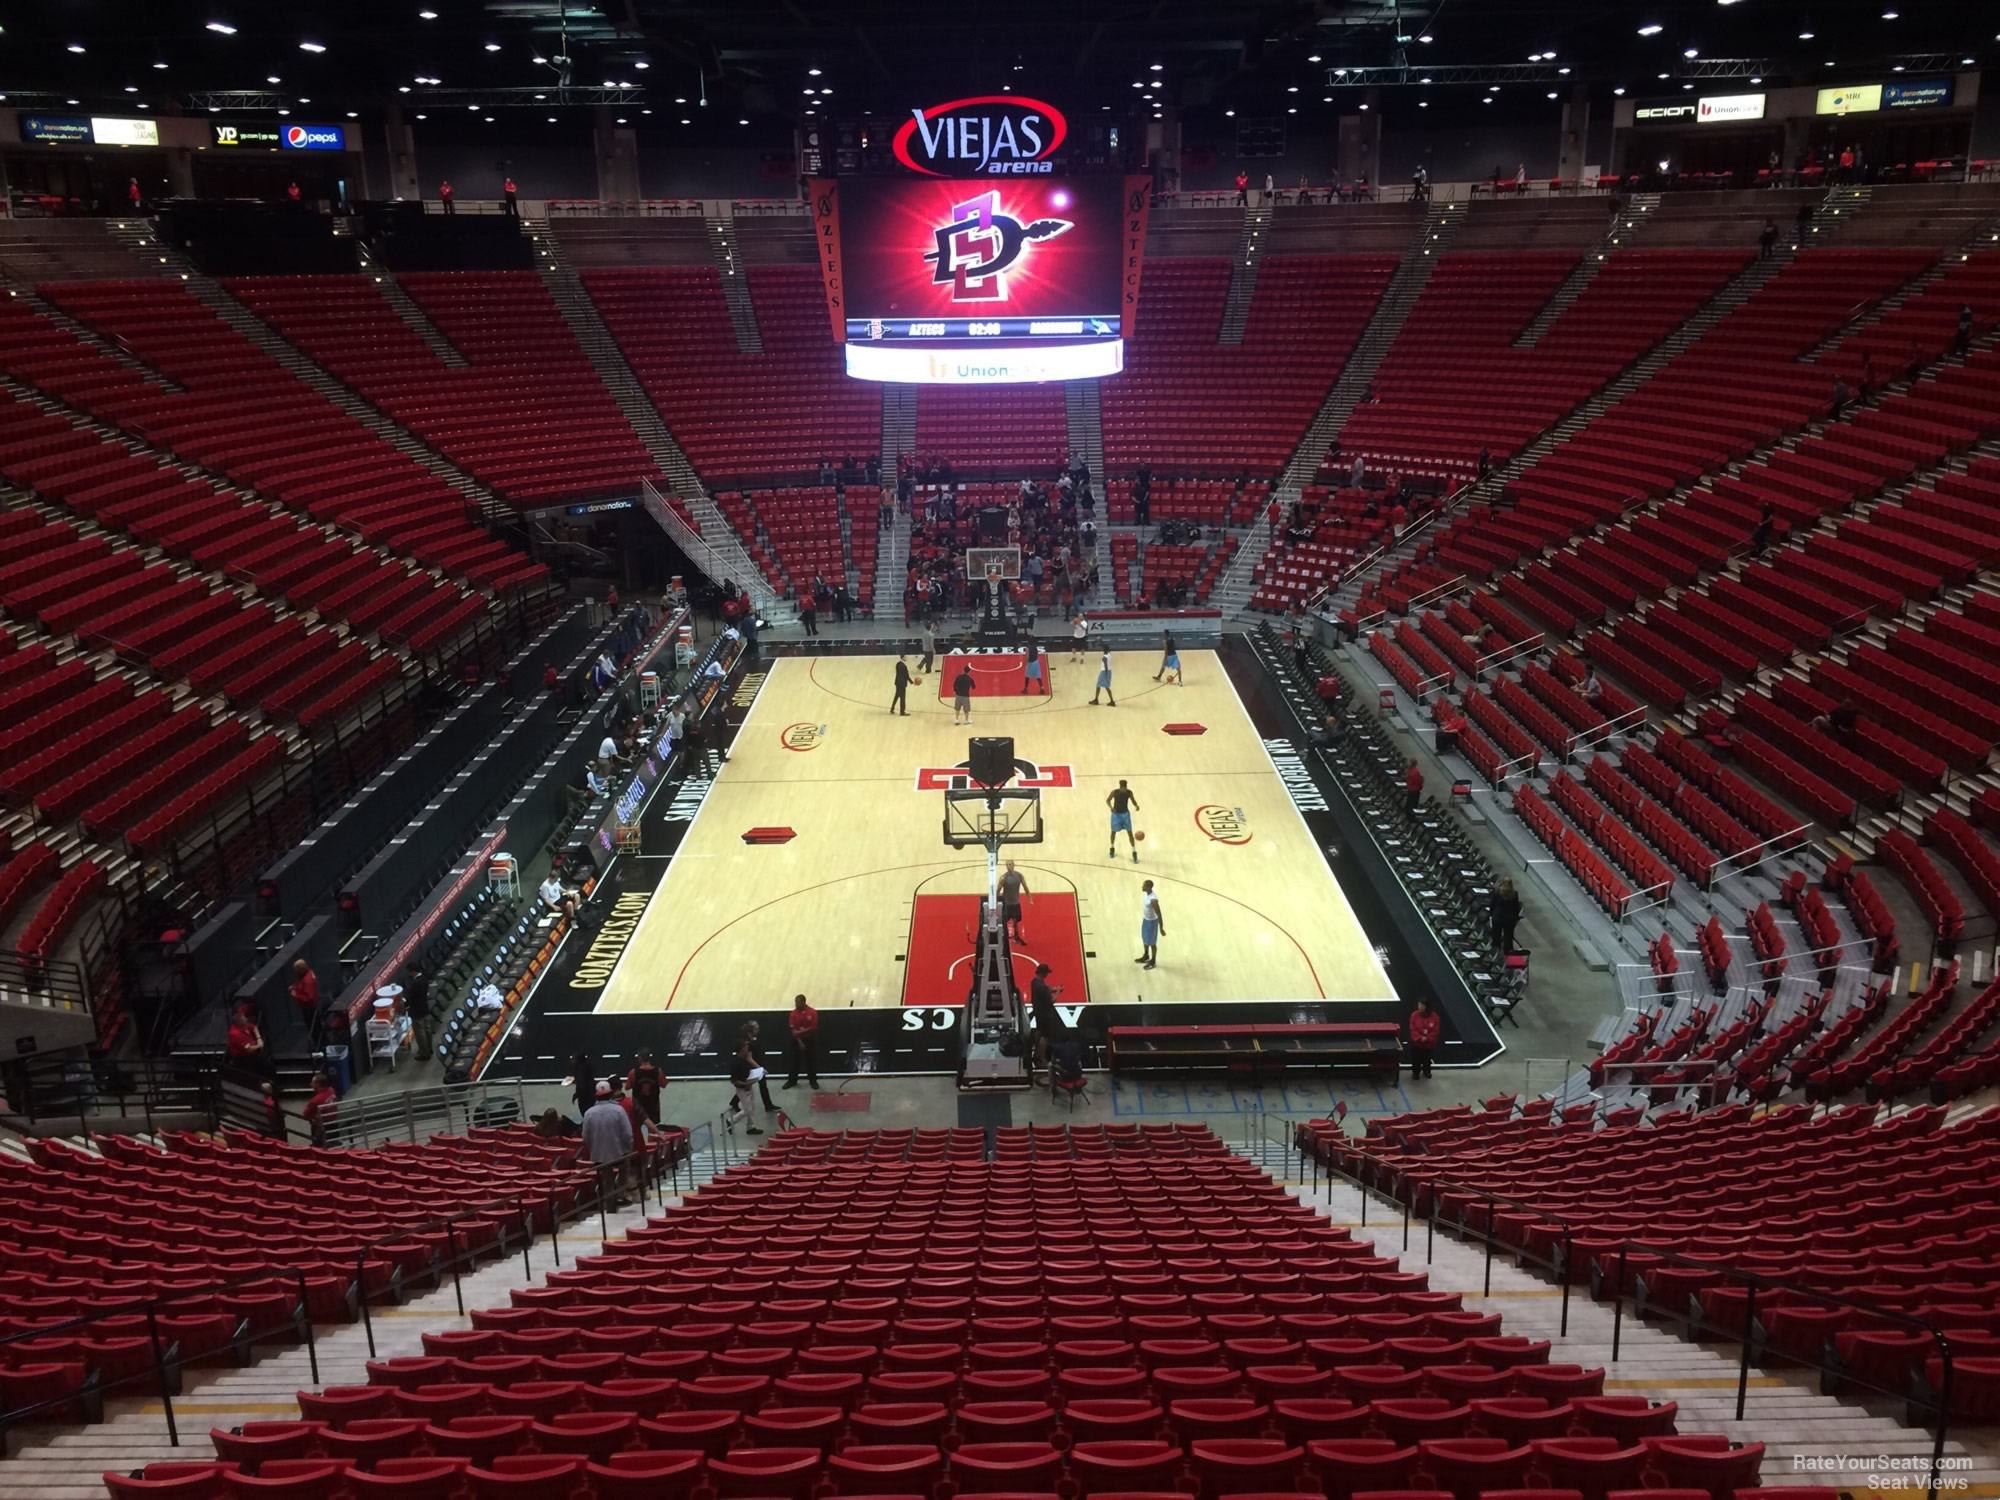 Viejas Arena Interactive Seating Chart Elcho Table